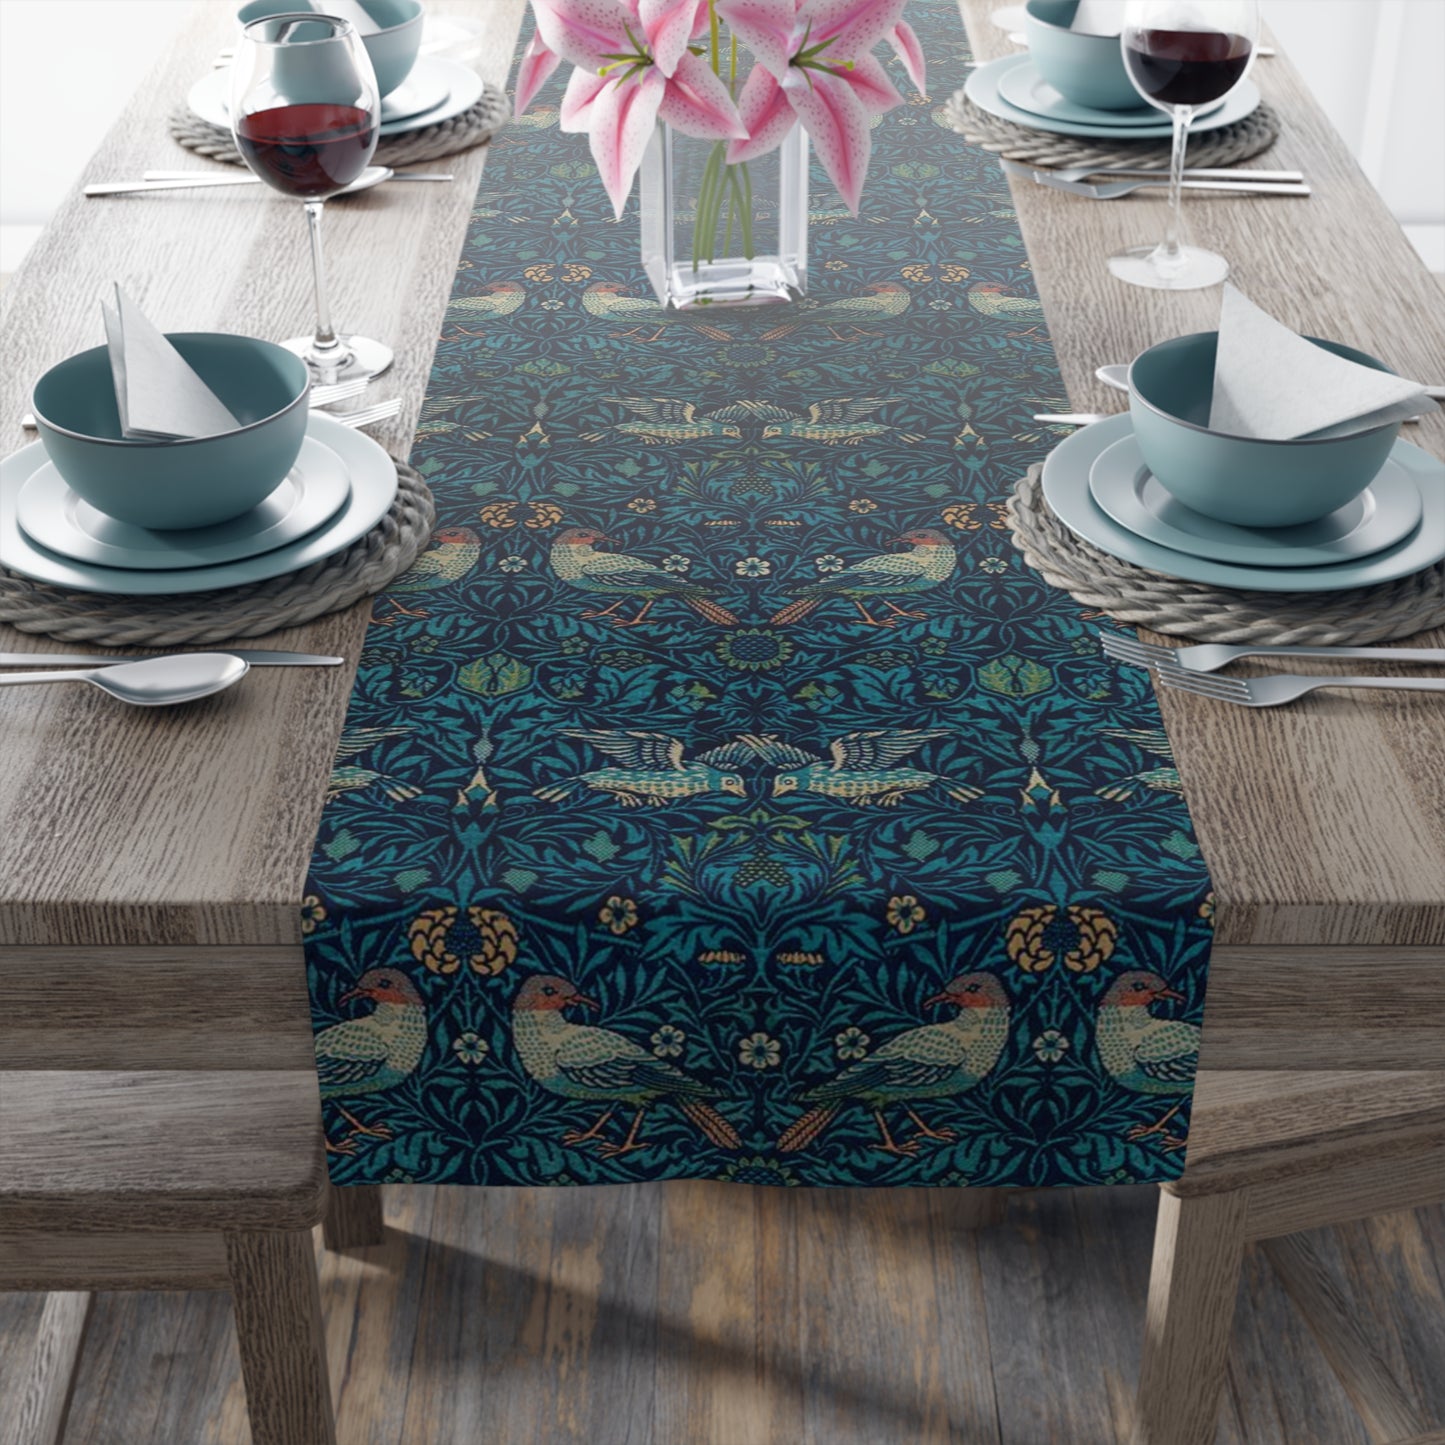 william-morris-co-table-runner-bluebird-collection-8